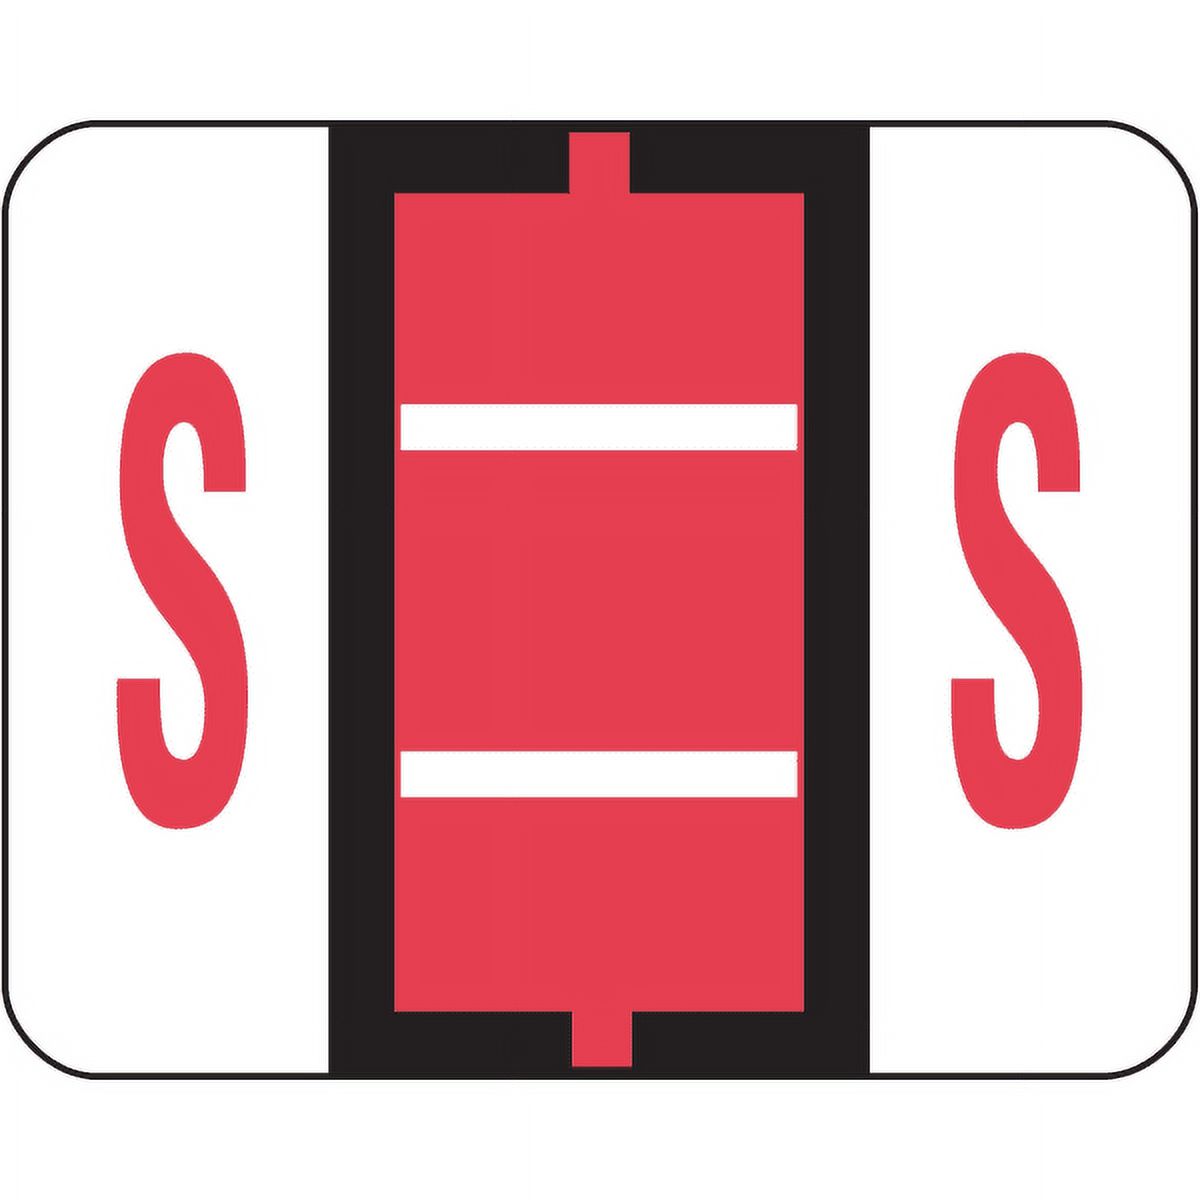 Smead 67089 A-Z Color-Coded Bar-Style End Tab Labels, Letter S, Pink, 500/Roll - image 3 of 3